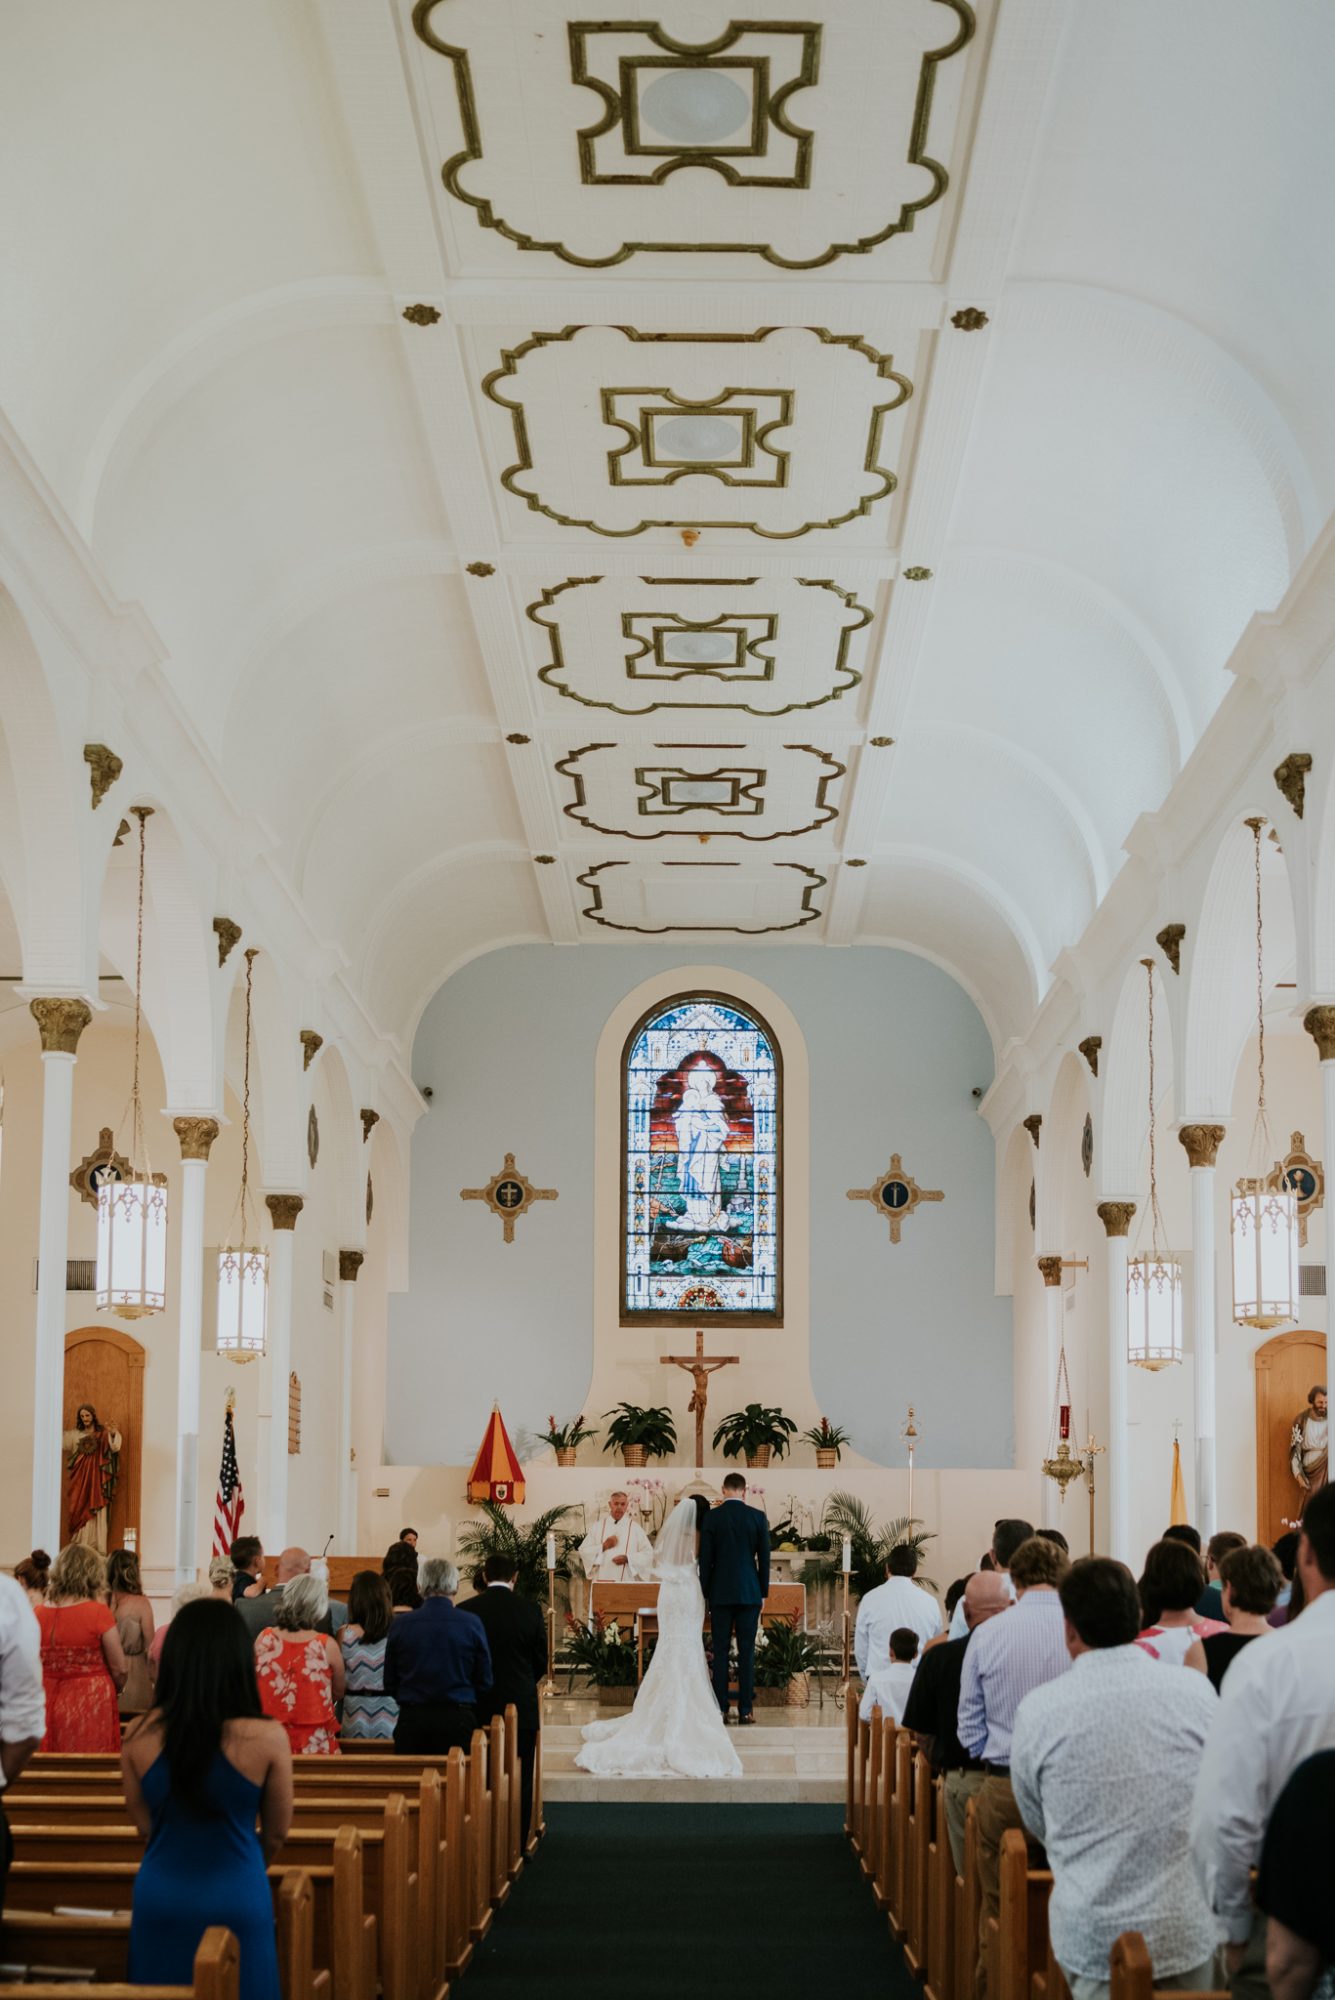 Erika and David, Key West Wedding Photographer, capturing a bride and groom in the aisle of St Mary's.